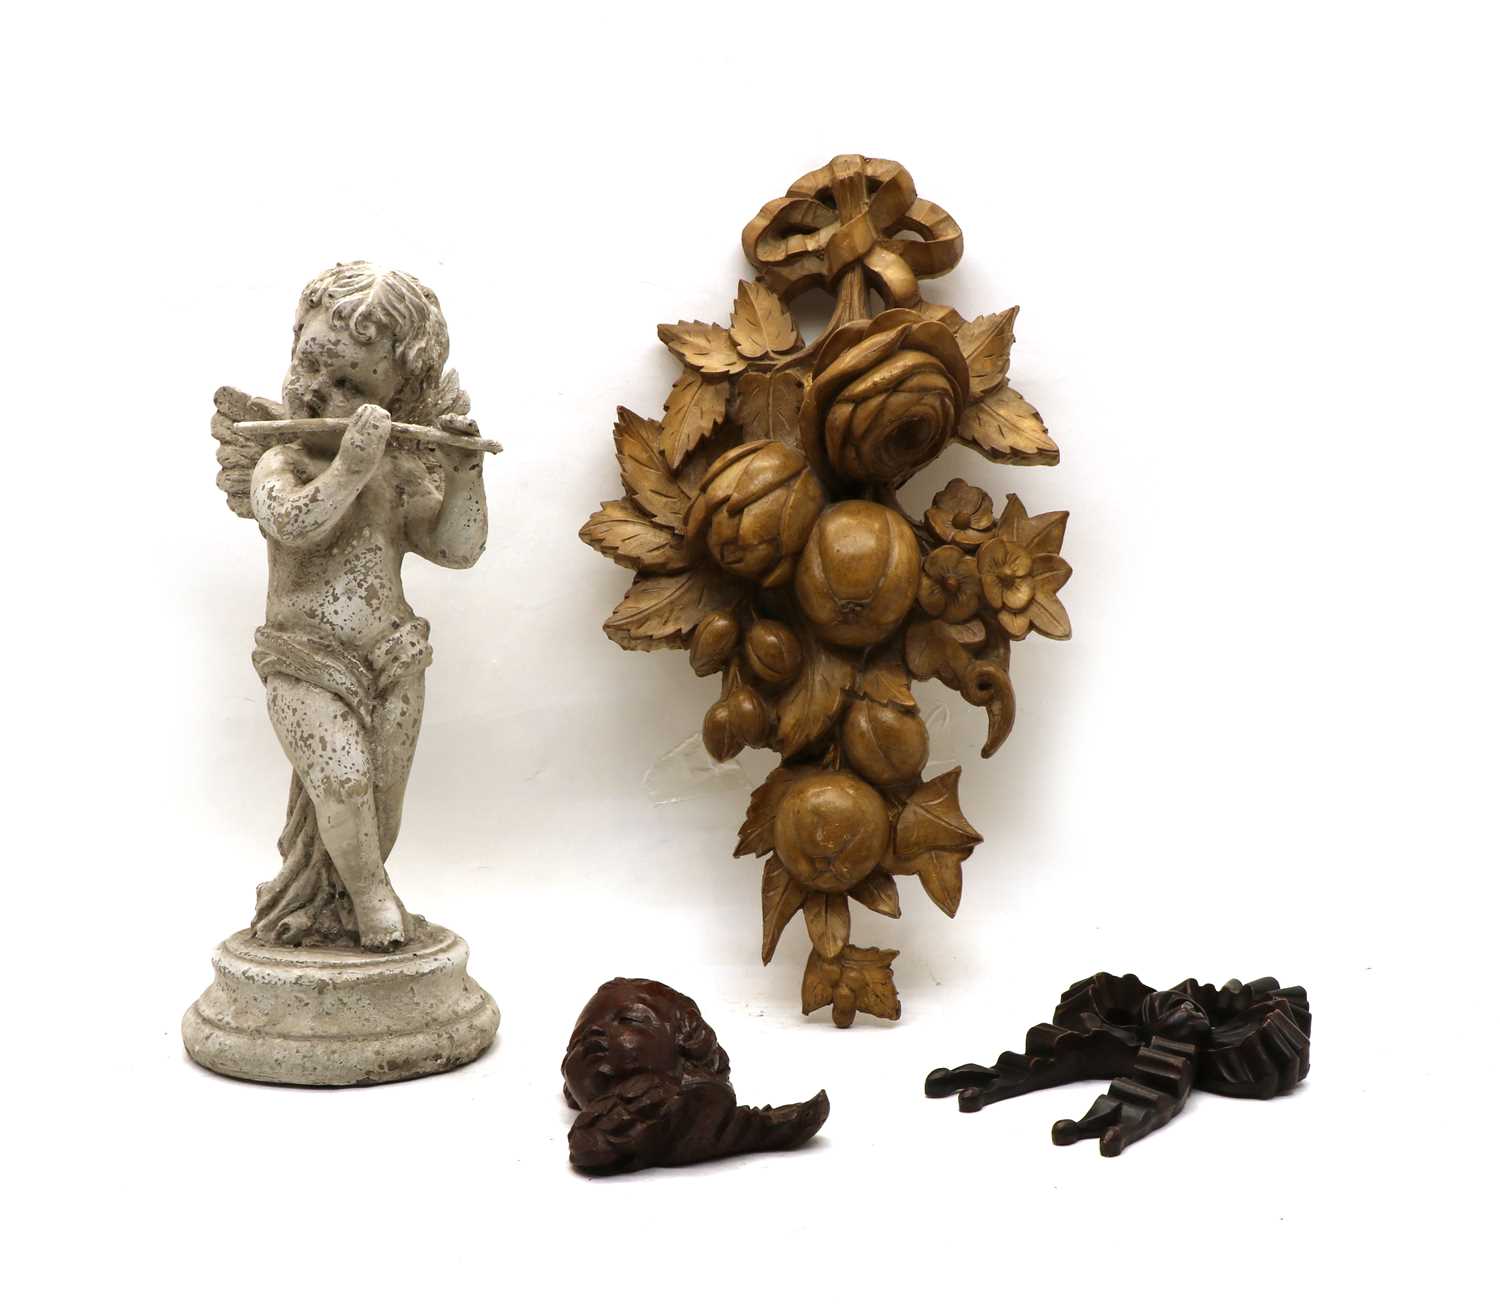 Lot 31 - A carved and painted wooden figure of a cherub playing a flute